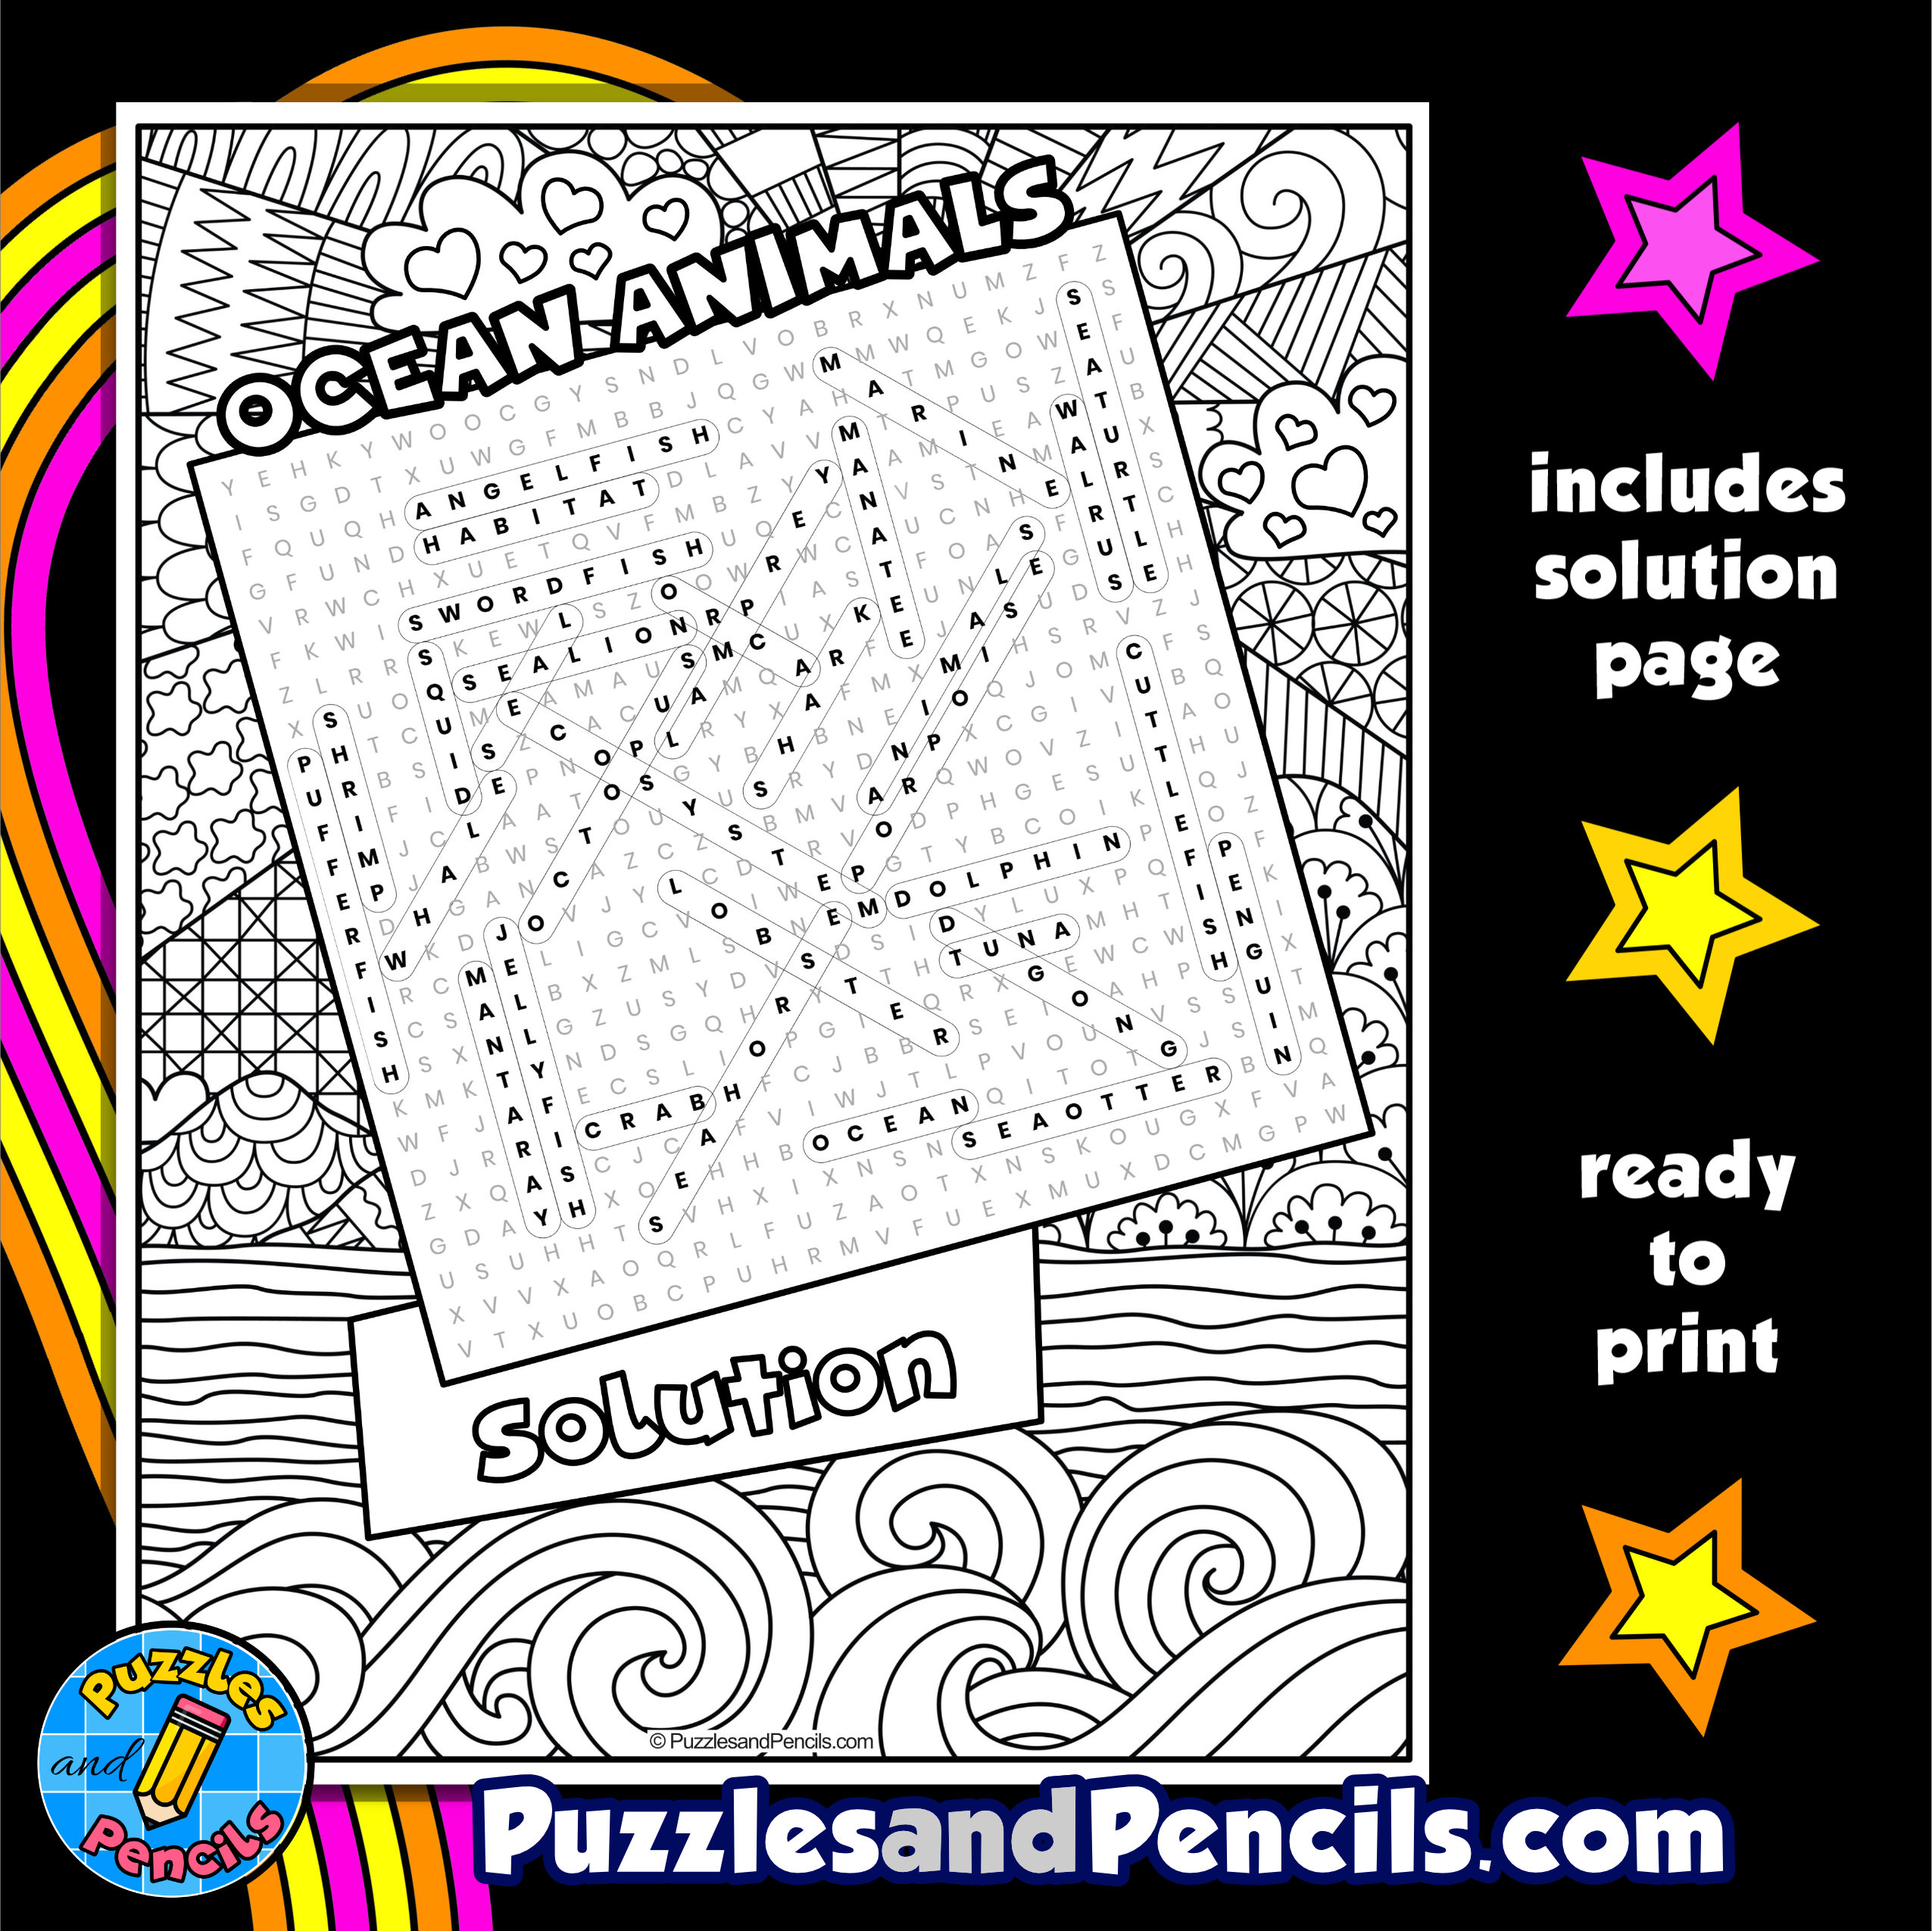 Ocean animals word search puzzle with coloring ocean habitat wordsearch made by teachers